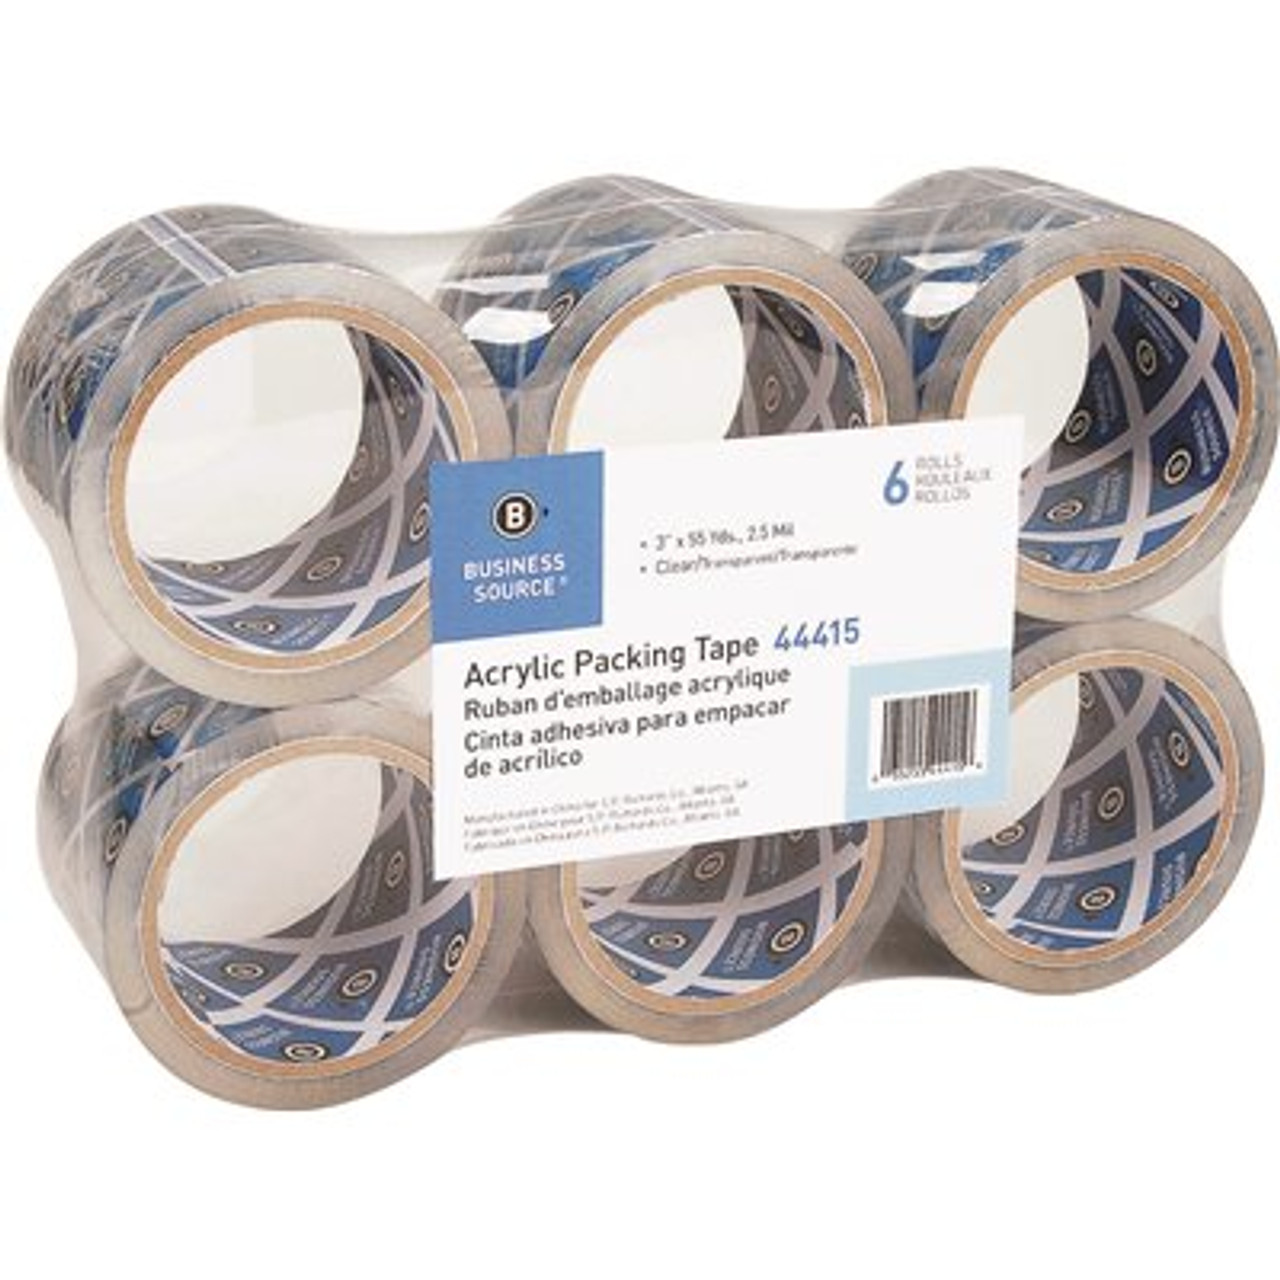 Business Source 3 in. x 55 ft. Packaging Tape, 2.5 mil, Acrylic/Clear (6 per Pack)